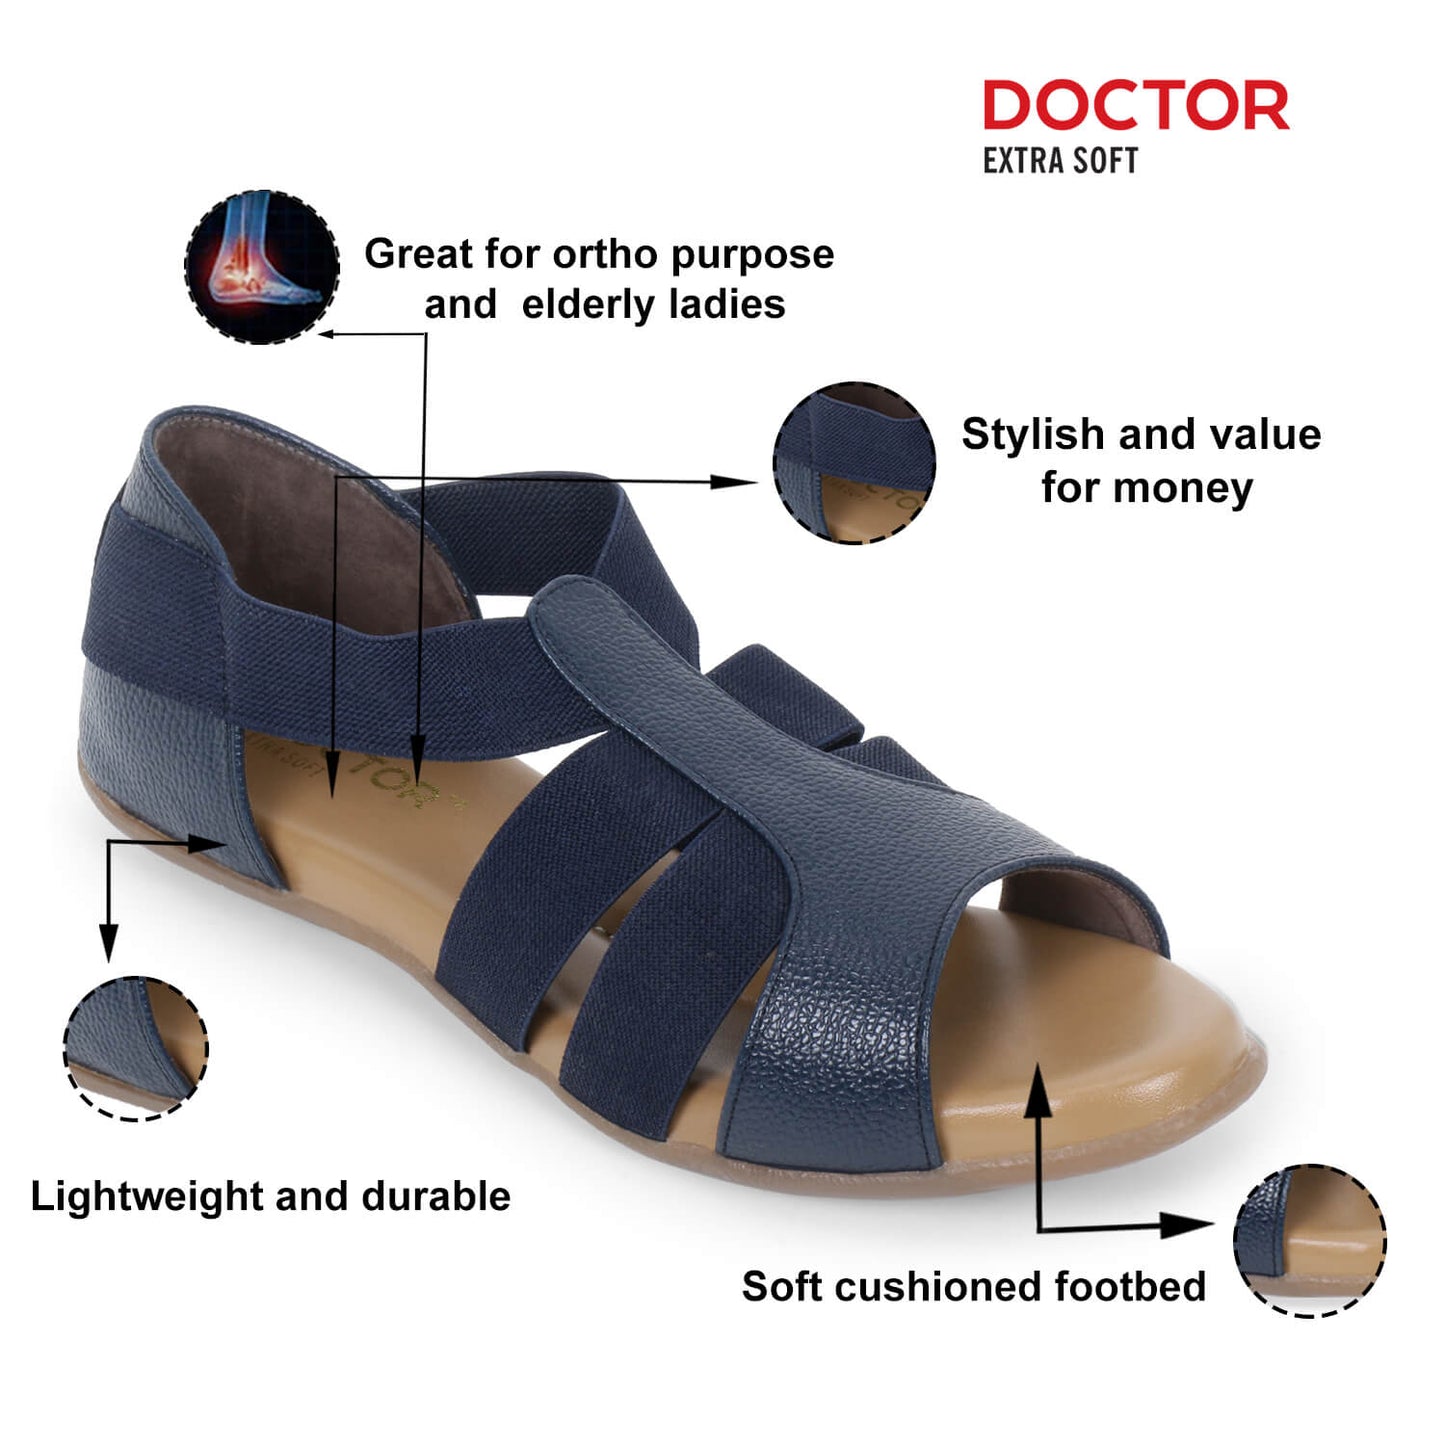 DOCTOR EXTRA SOFT Women's Sandals ART-539, Ortho & Diabetic Foot Problems, Lightweight & Durable